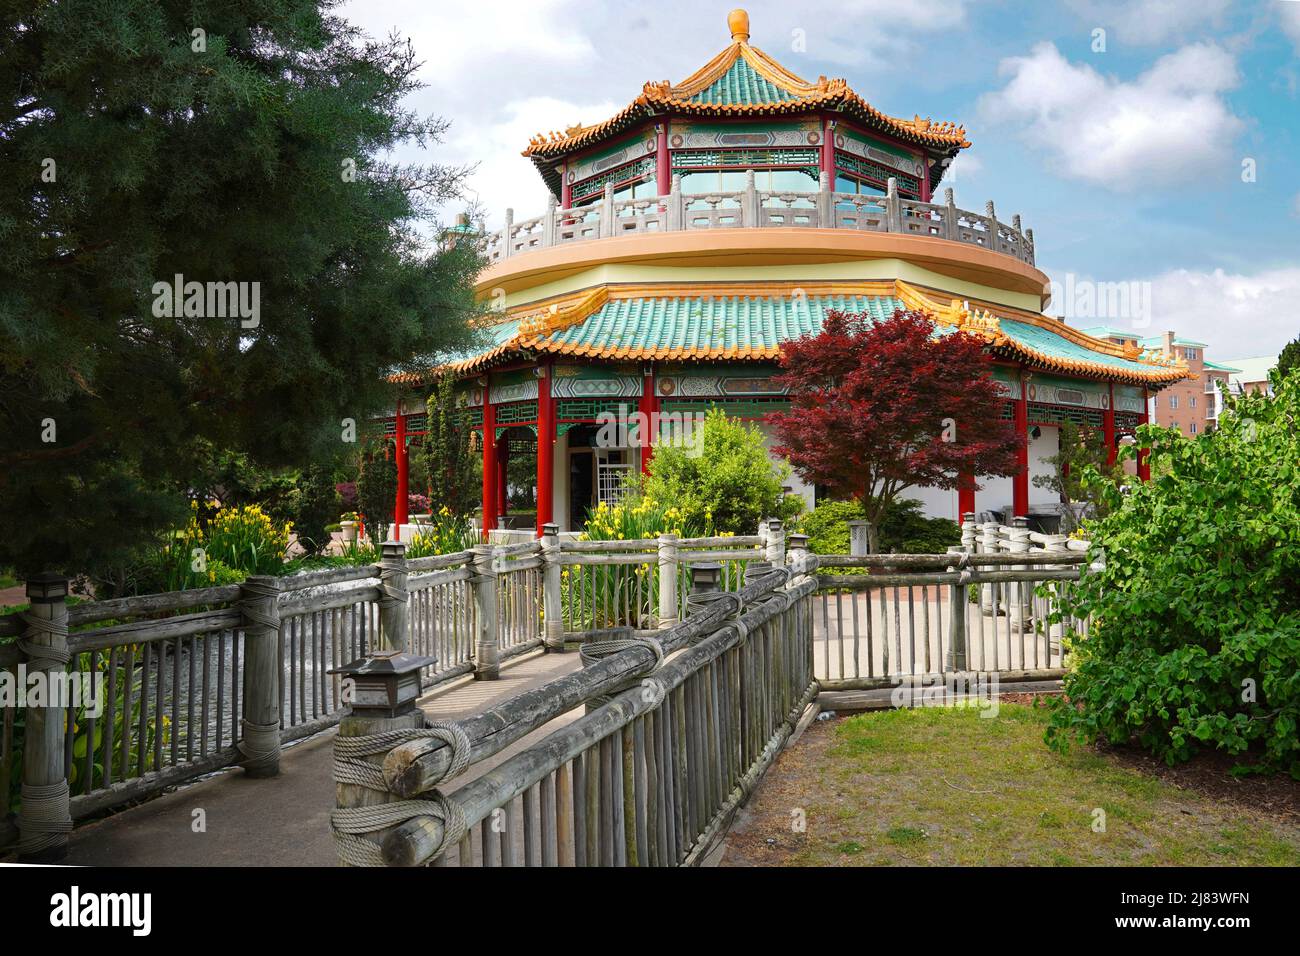 The pagoda is part of the oriental gardens and was a gift to Virginia and the City of Norfolk in 1989 honoring Taiwans trading ties with Virginia. Stock Photo